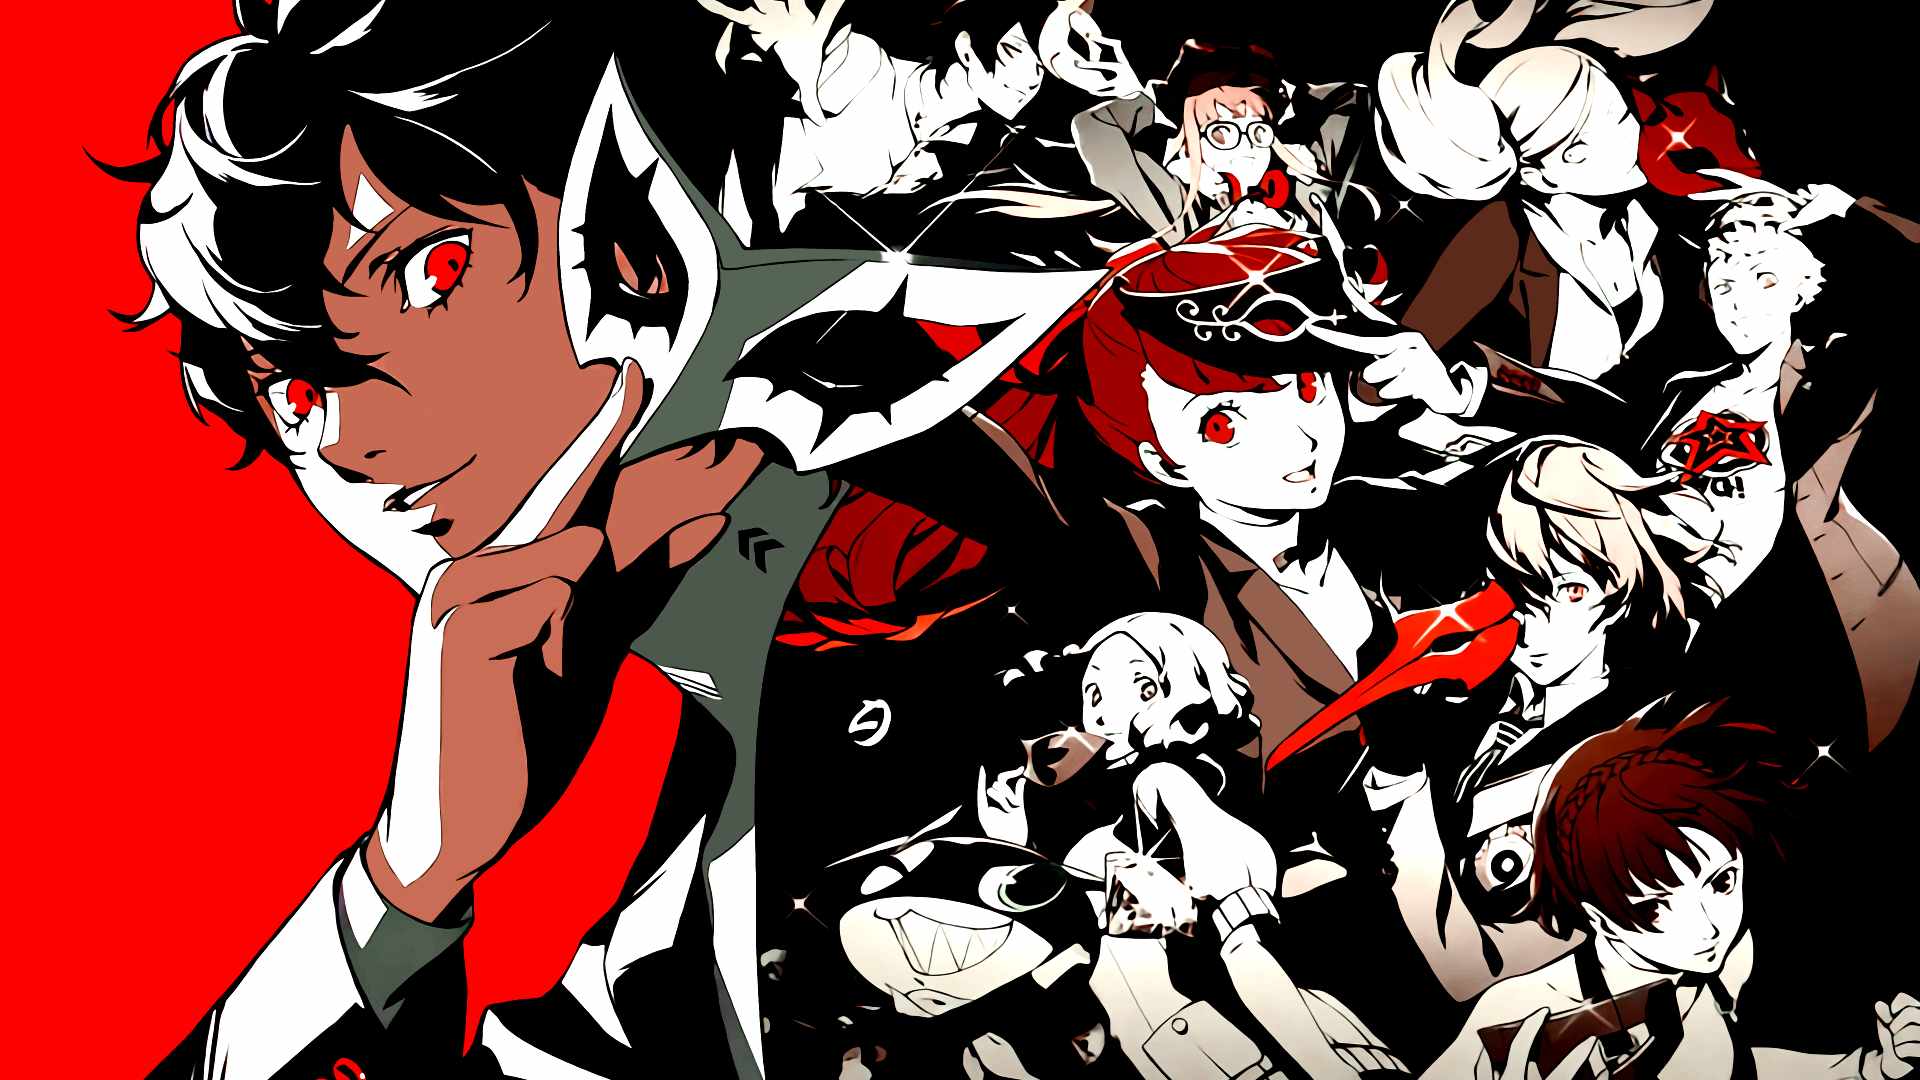 The Persona 5 sub-series contributes over 50% of Persona's total sales.